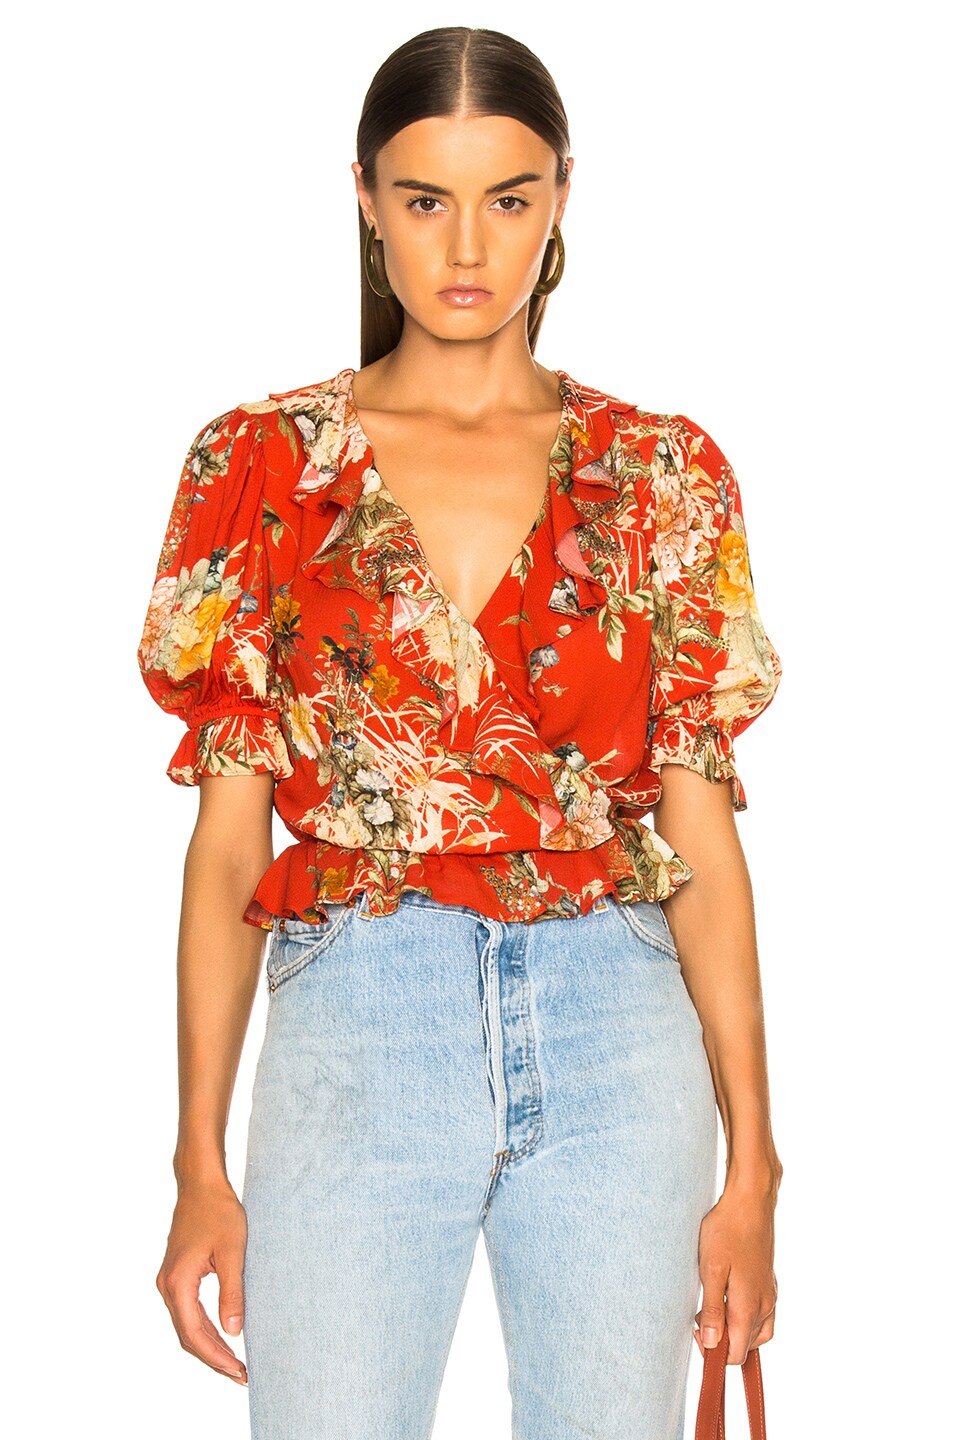 ICONS Objects of Devotion Ruffle Cha Cha Top in Red Floral | FWRD